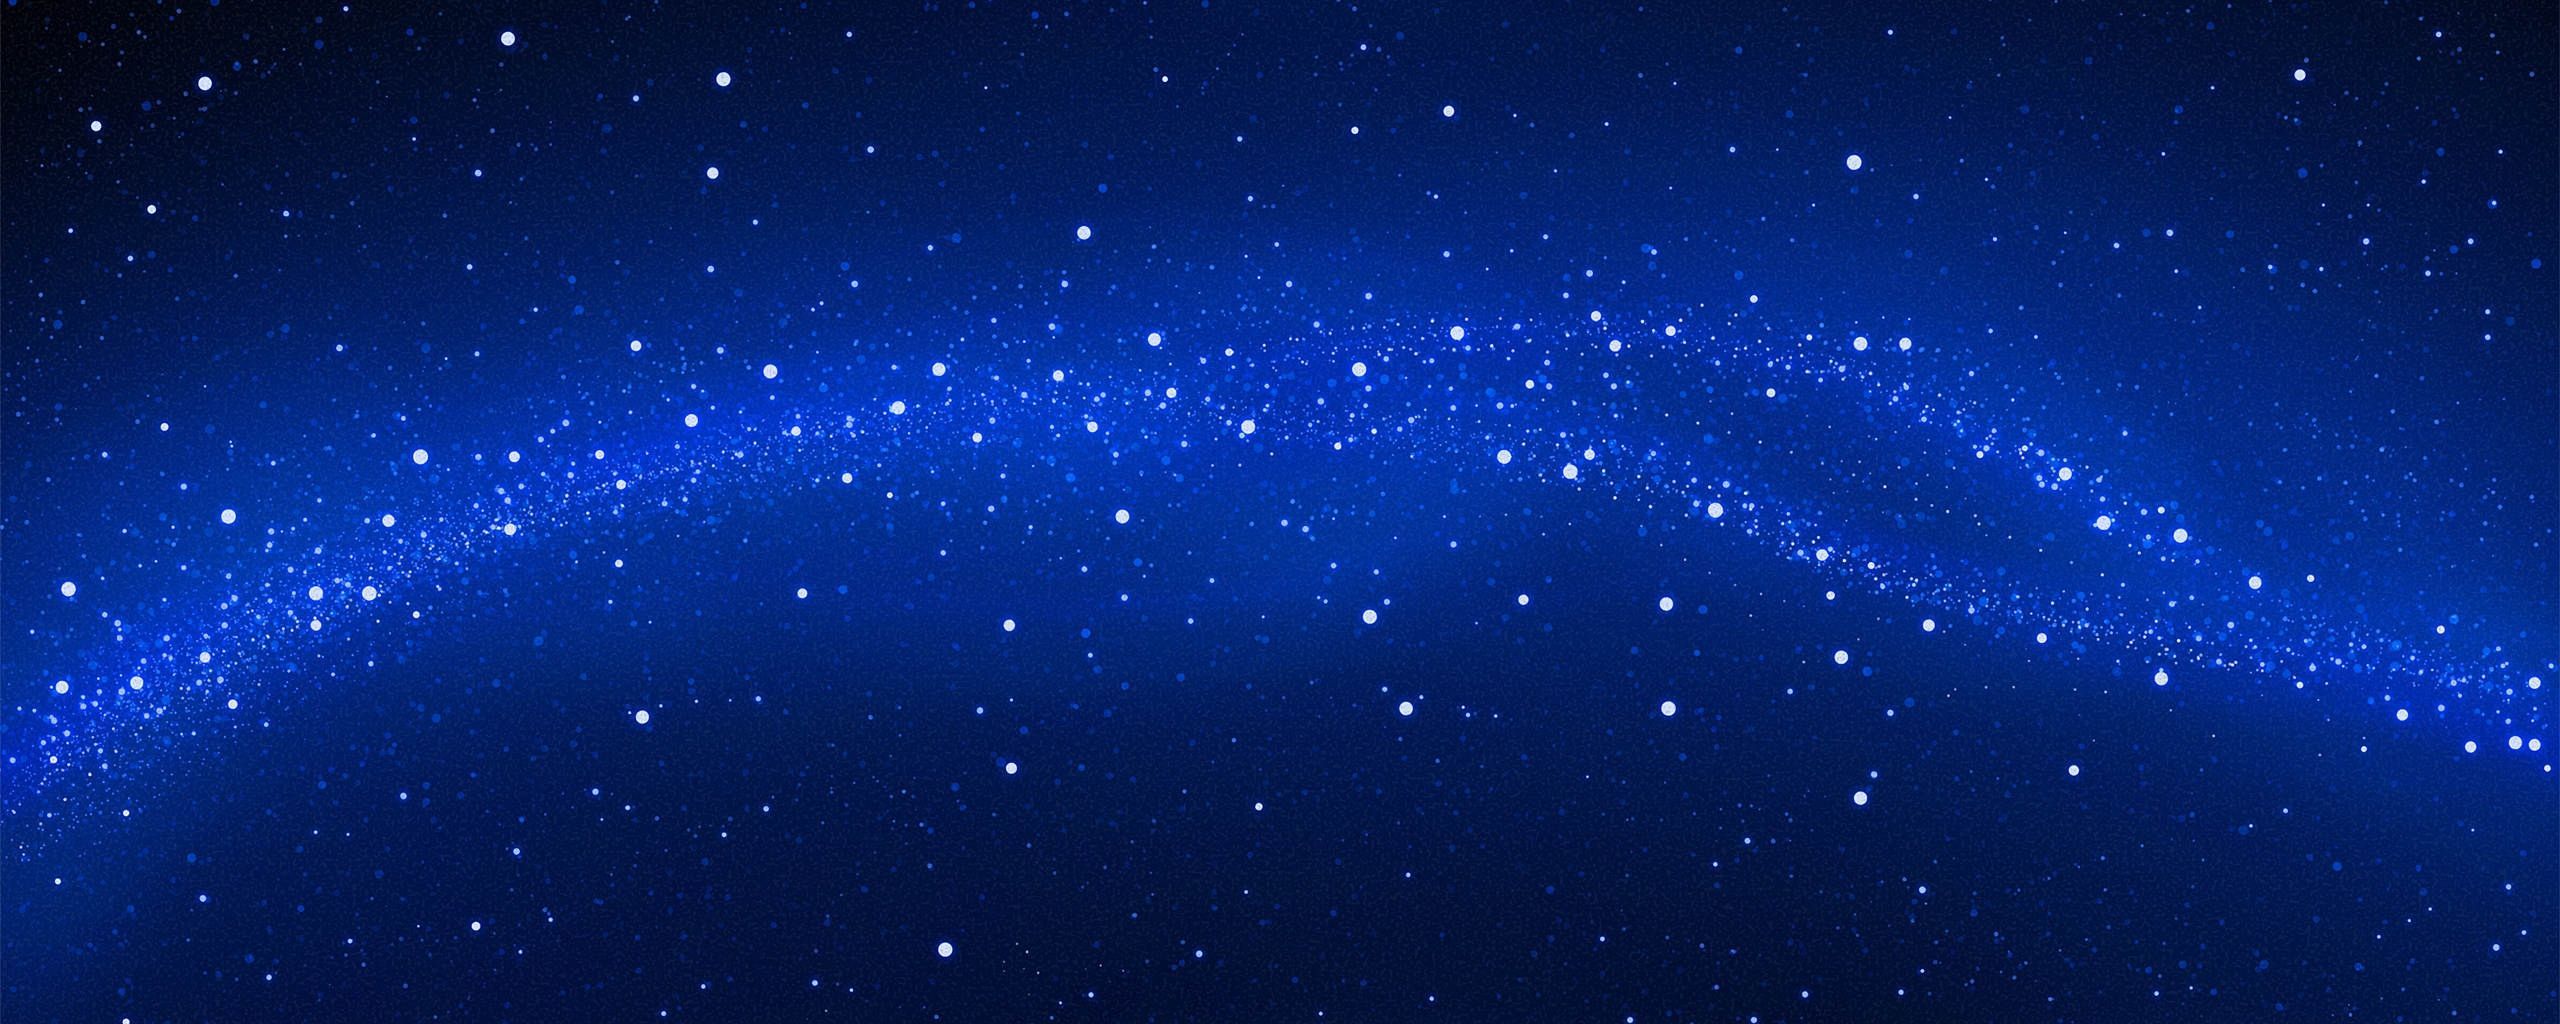 Download Wallpaper 2560x1024 Space, Stars, Blue background Dual